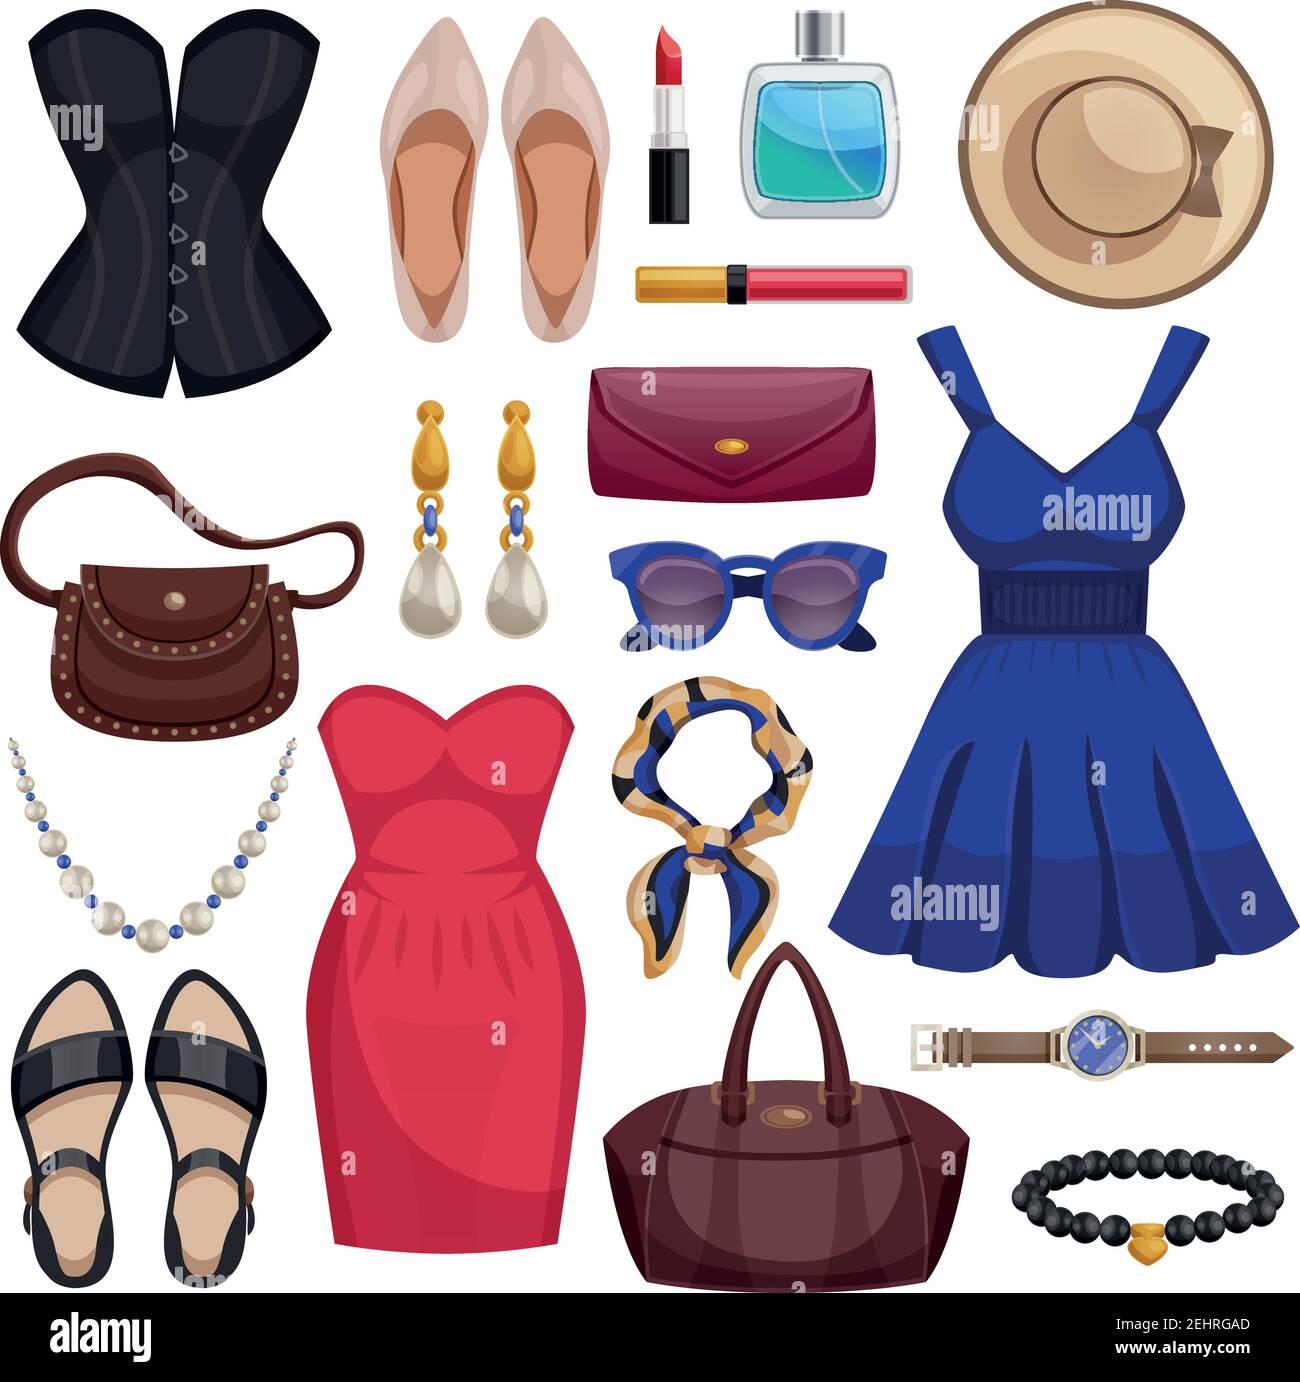 Colored and isolated women accessories icon set with clothes dress